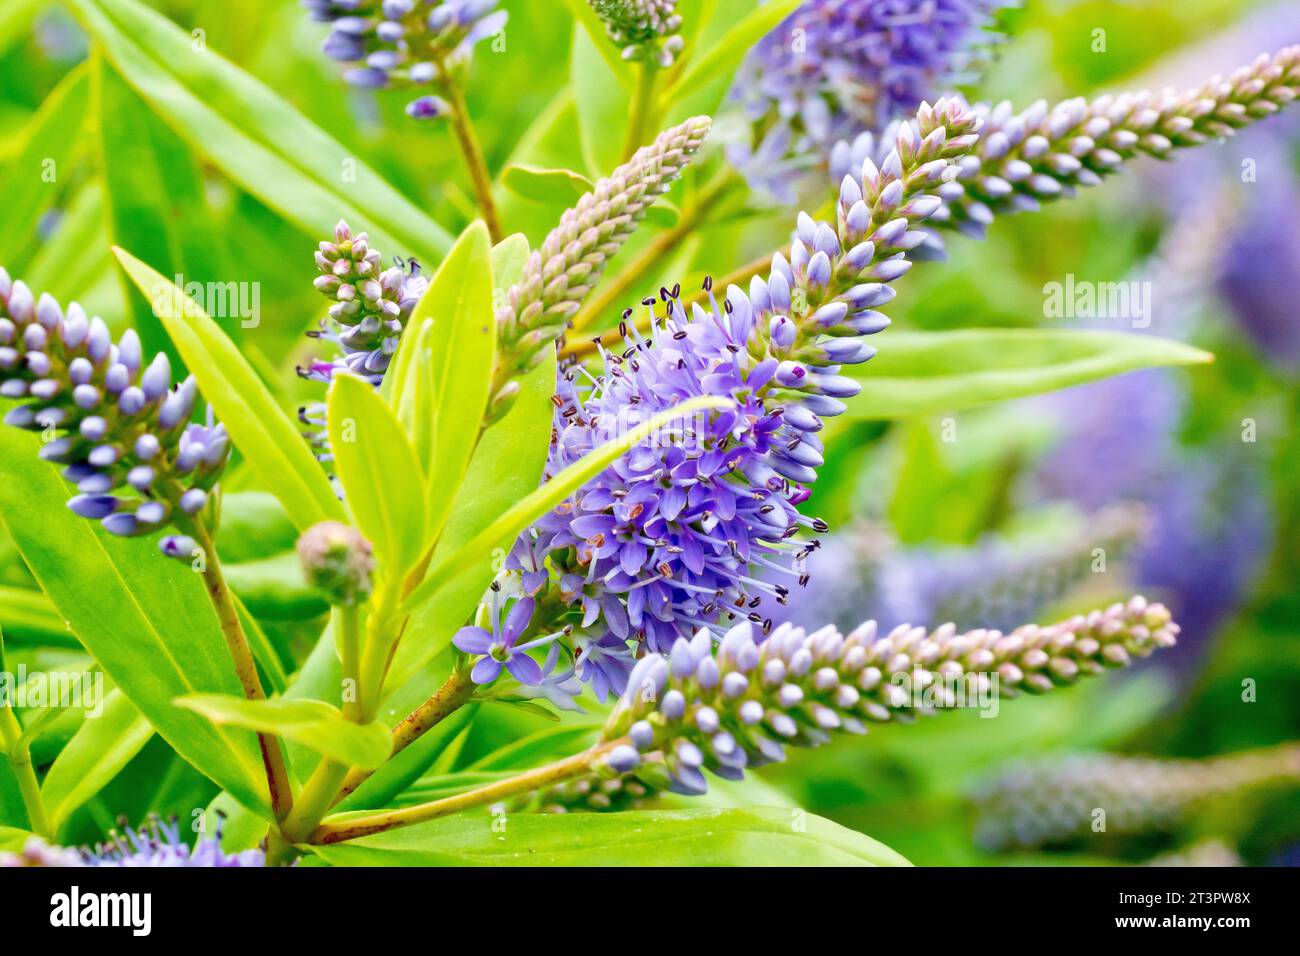 Hebe, a shrub of the veronica family, close up showing a spike of the lilac flowers of this particular cultivar along with the leaves and flowerbuds. Stock Photo